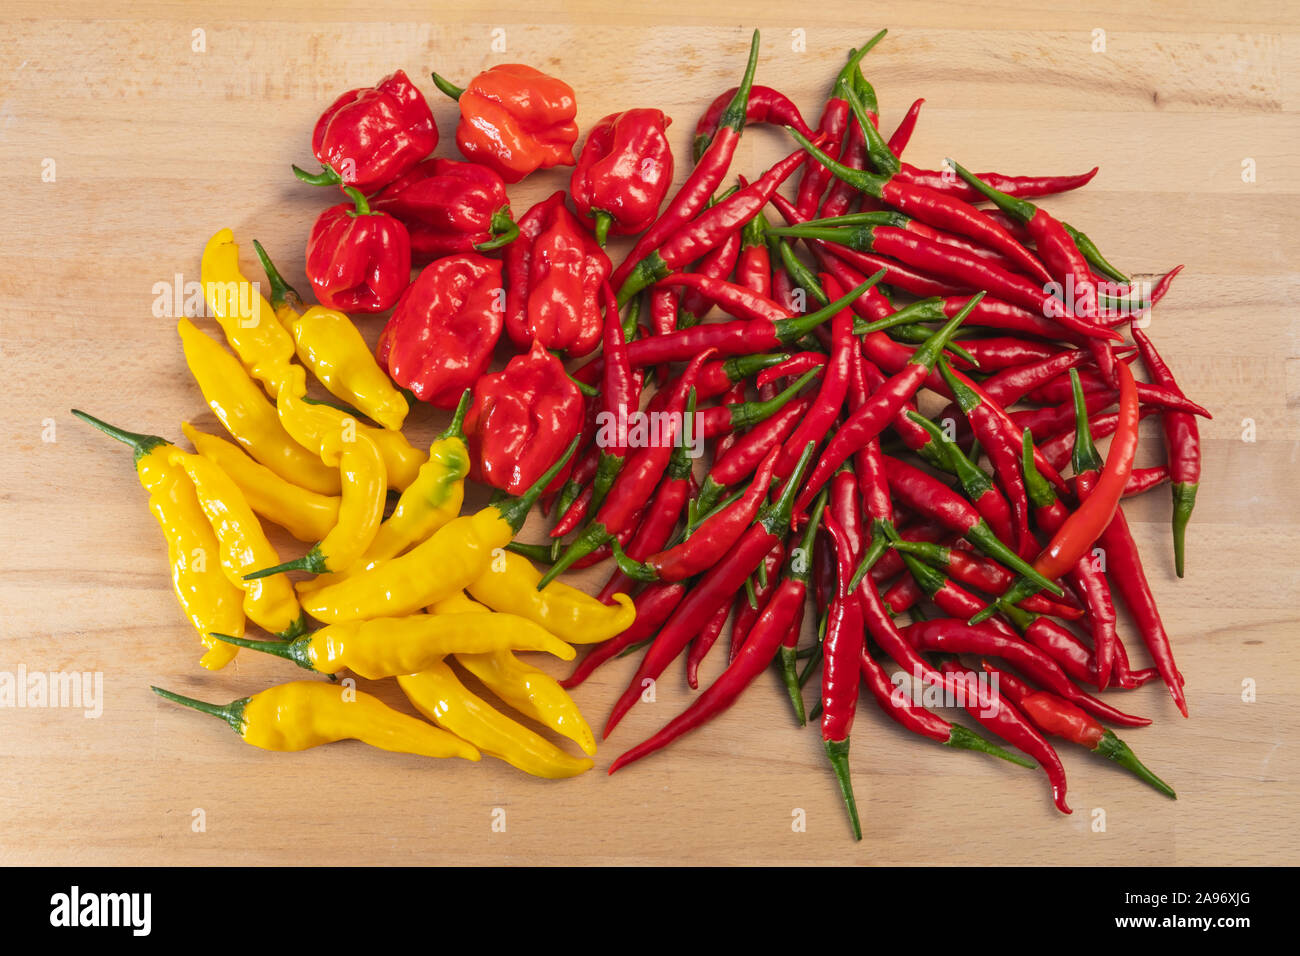 Fresh assorted chili peppers, red, orange and yellow hot peppers on a wooden table viewed from above, habanero, lemon drop, thai chilli pepper Stock Photo